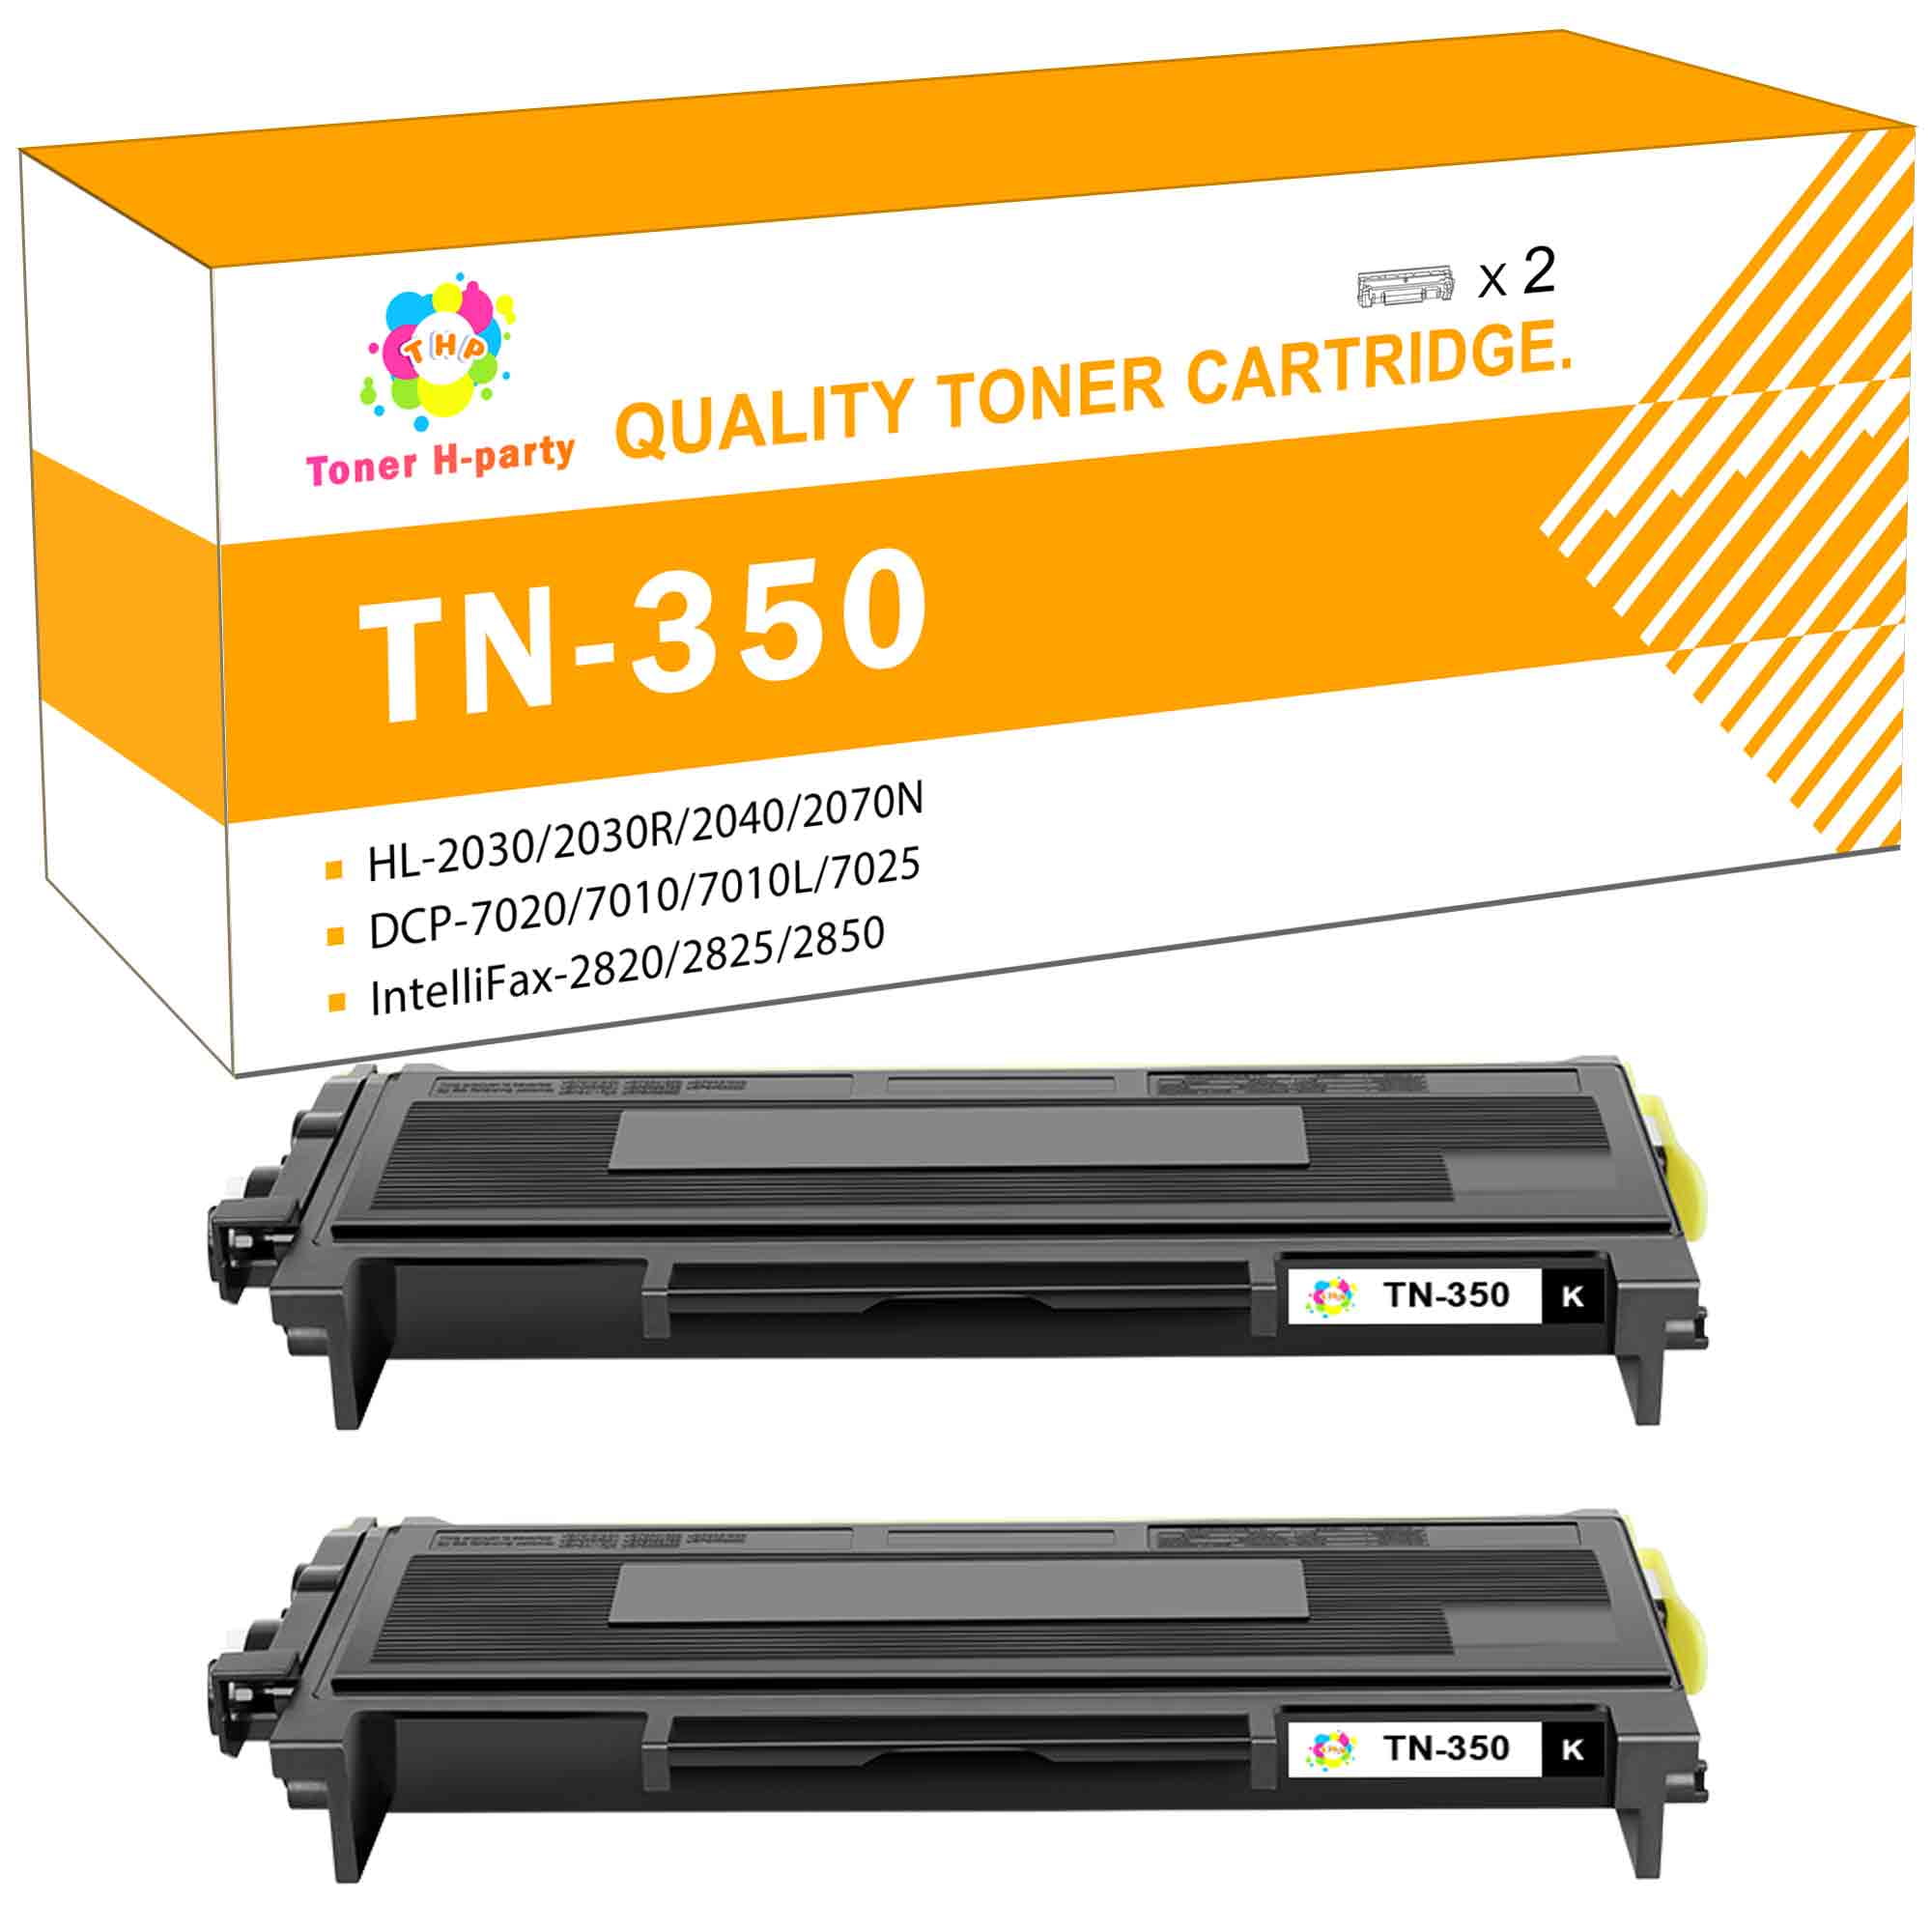 infinito Monasterio ropa interior Toner H-Party 2-Pack Compatible Toner Cartridge for Brother TN-350 HL-2030  2030R 2040 2070N 2070NR 2045 2075N, DCP-7020 7010L 7025, MFC-7220 7225N  7420 7820 7820N Printer Ink Black - Walmart.com